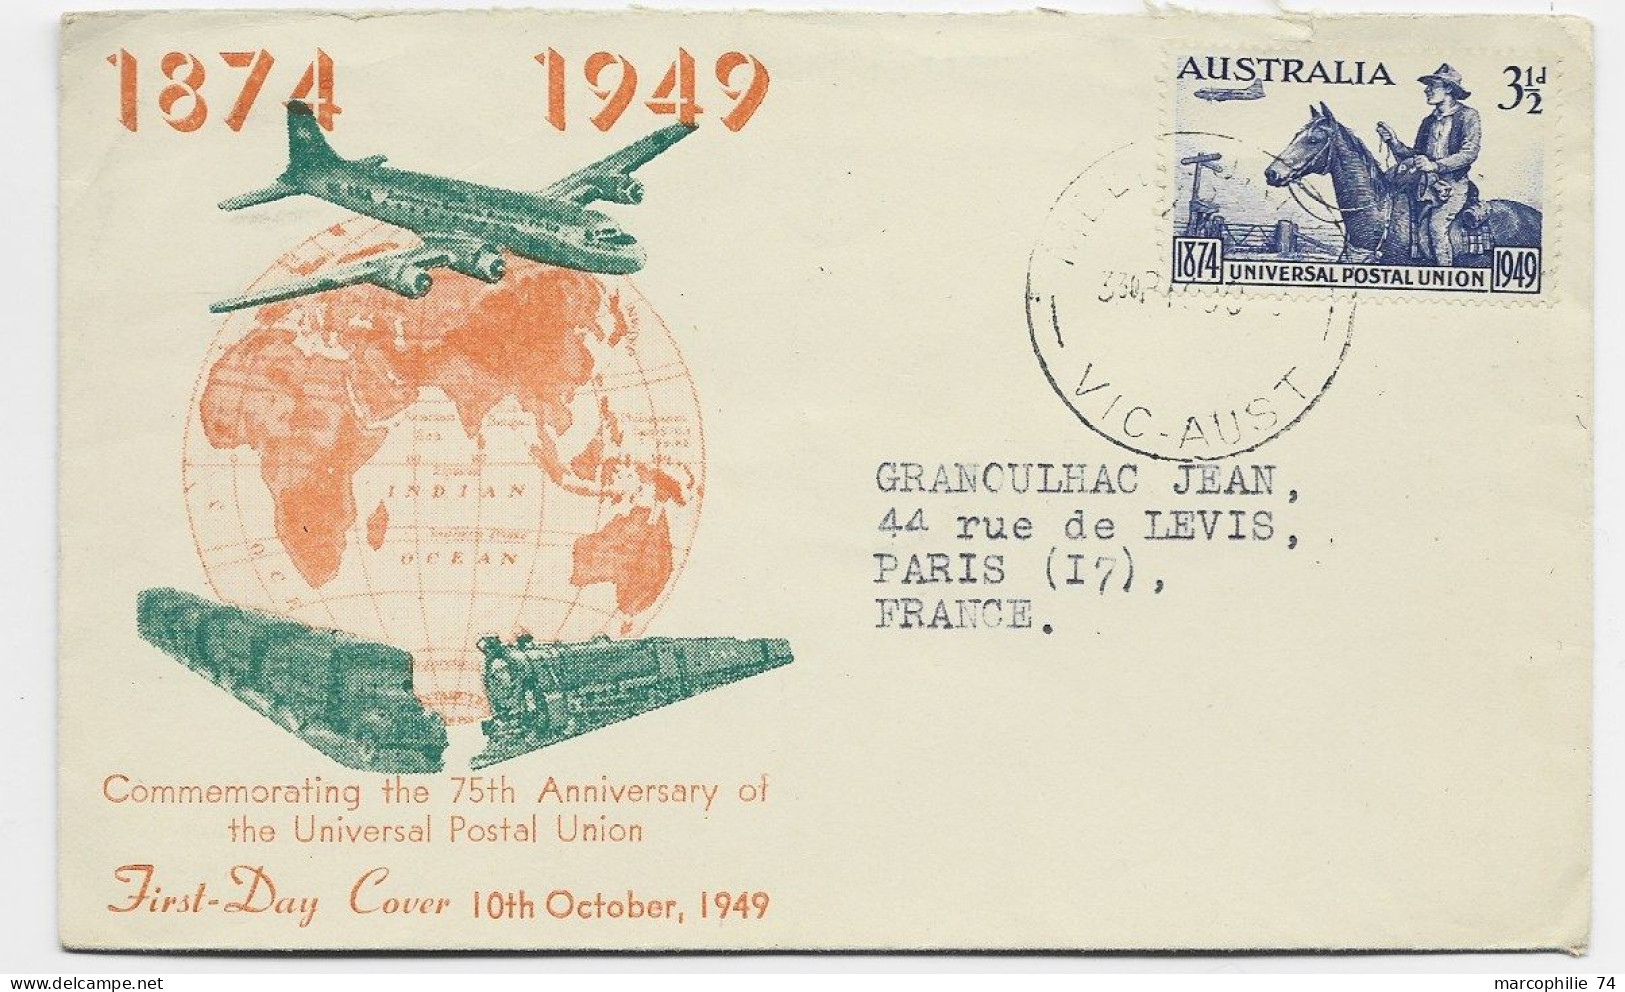 AUSTRALIA 3 1/2D  UPU SOLO LETTRE COVER FDC 1874 1949 TO FRANCE - Lettres & Documents